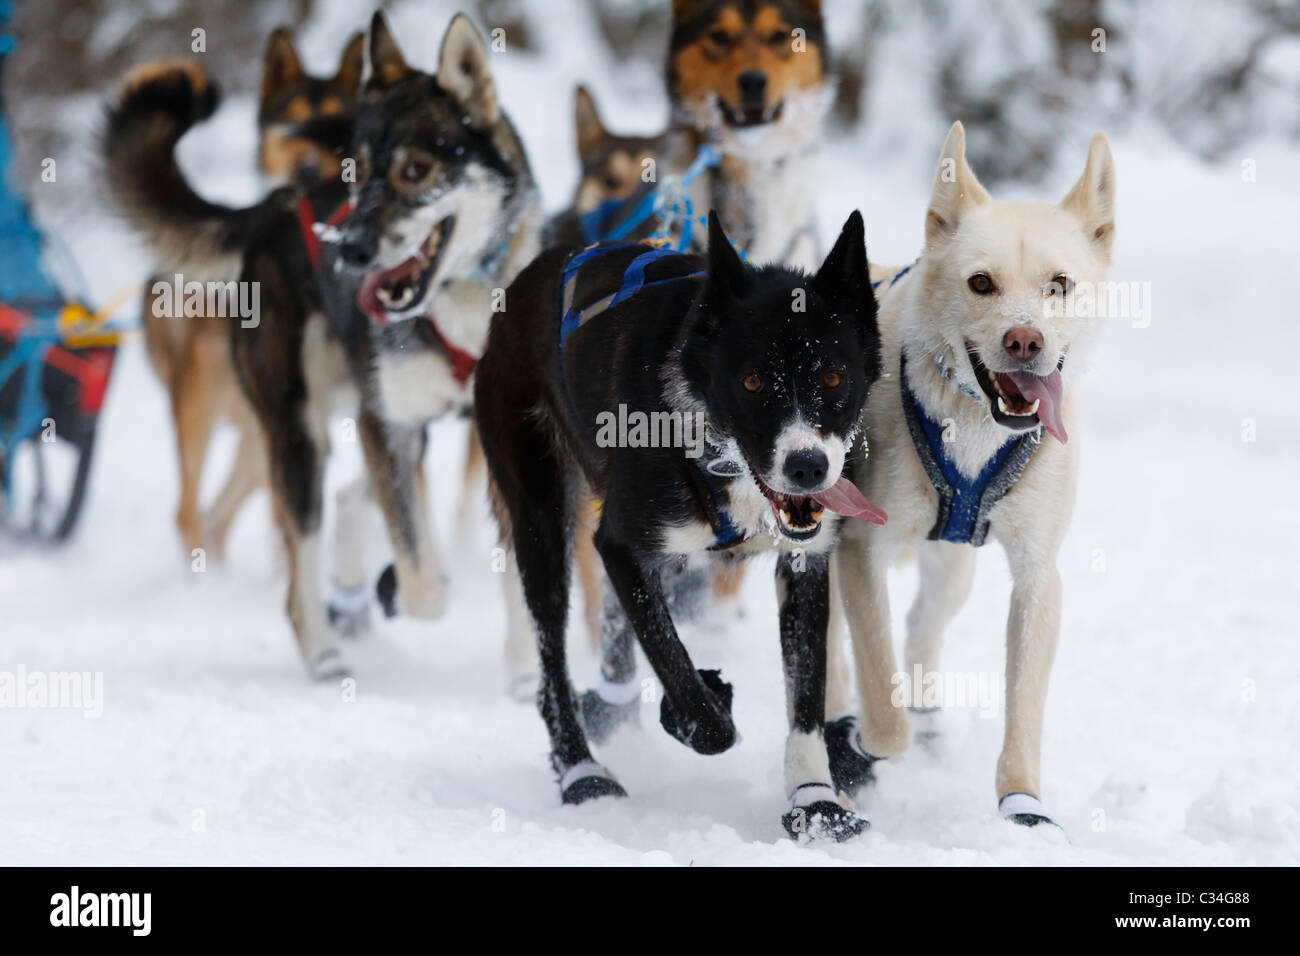 A sled dog team racing through the Chippewa National Forest in Northern Minnesota. Stock Photo